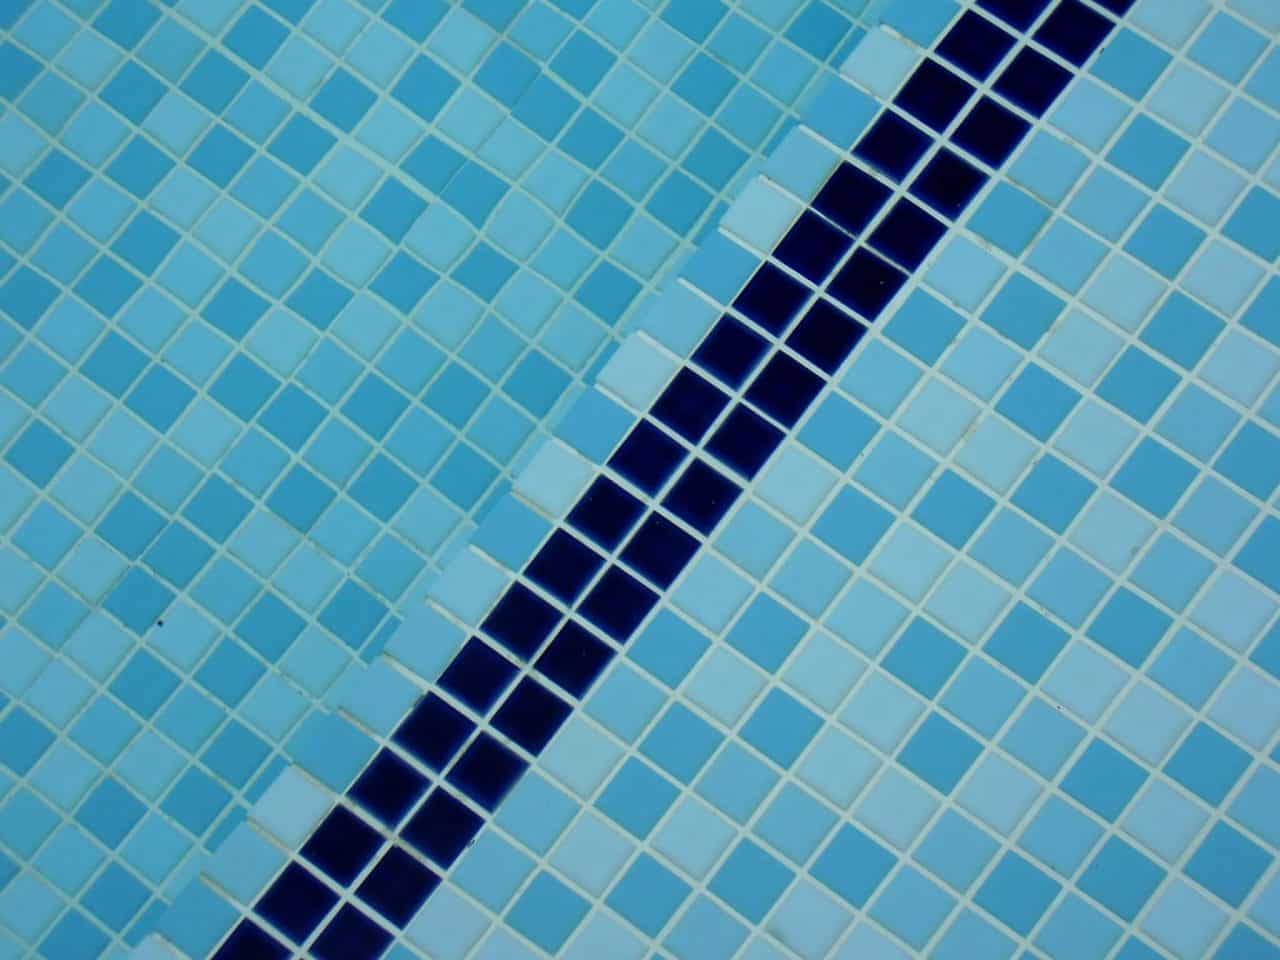 Looking down into an indoor pool at the blue line that separates the shallow and deep end of the pool